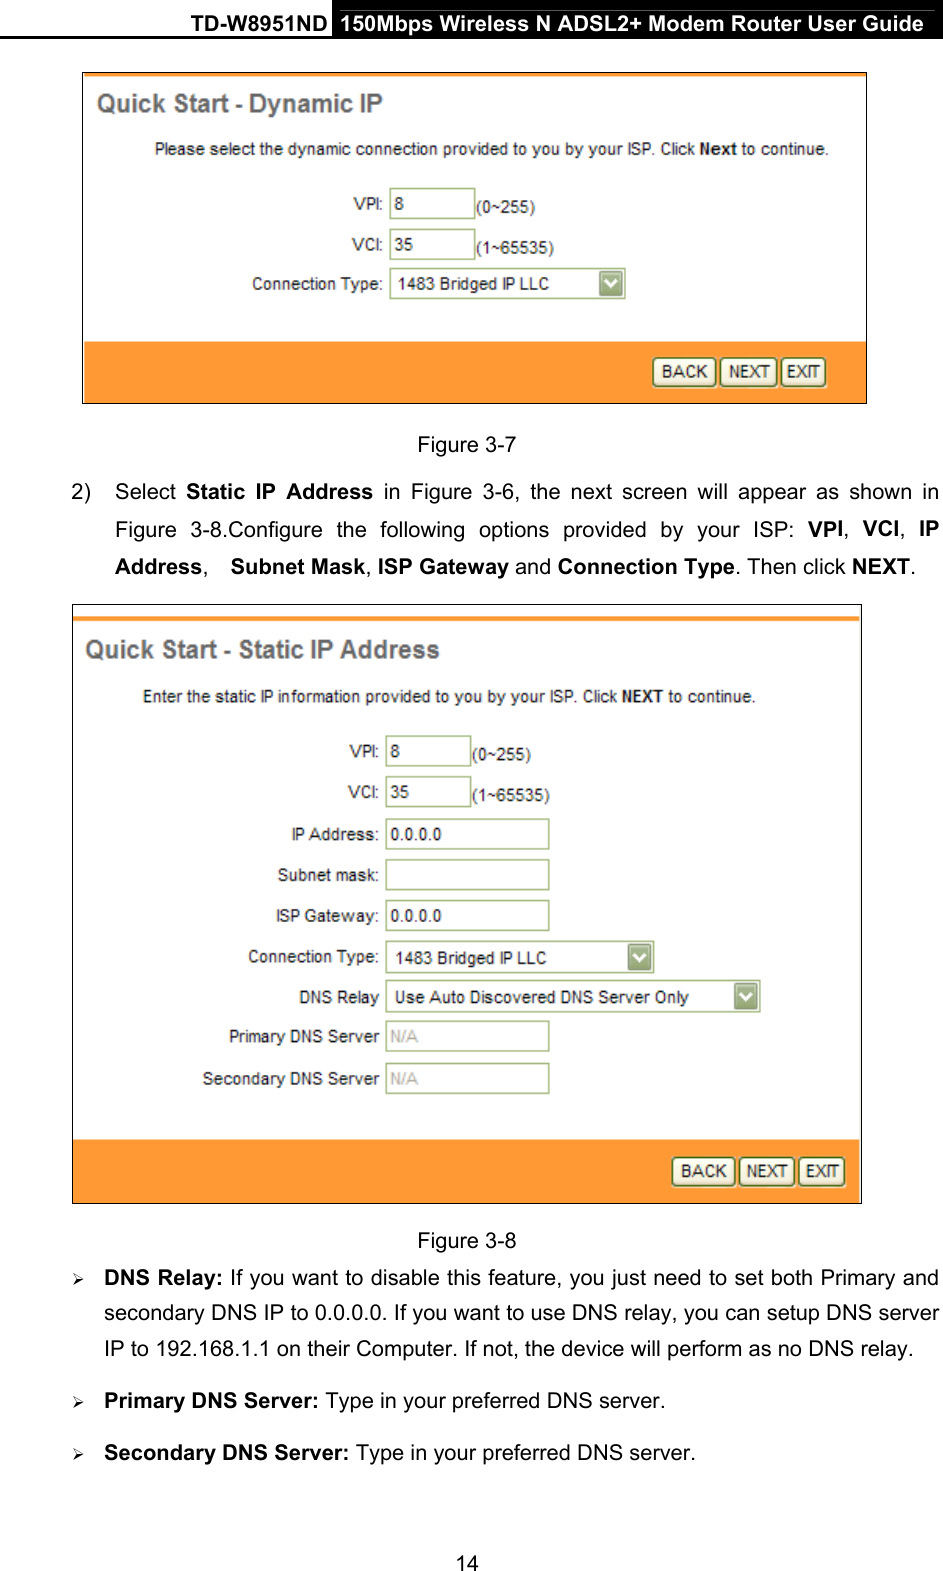 TD-W8951ND  150Mbps Wireless N ADSL2+ Modem Router User Guide  Figure 3-7 2) Select Static IP Address in  Figure 3-6, the next screen will appear as shown in Figure 3-8.Configure the following options provided by your ISP: VPI,  VCI,  IP Address,  Subnet Mask, ISP Gateway and Connection Type. Then click NEXT.  Figure 3-8  DNS Relay: If you want to disable this feature, you just need to set both Primary and secondary DNS IP to 0.0.0.0. If you want to use DNS relay, you can setup DNS server IP to 192.168.1.1 on their Computer. If not, the device will perform as no DNS relay.  Primary DNS Server: Type in your preferred DNS server.  Secondary DNS Server: Type in your preferred DNS server. 14 